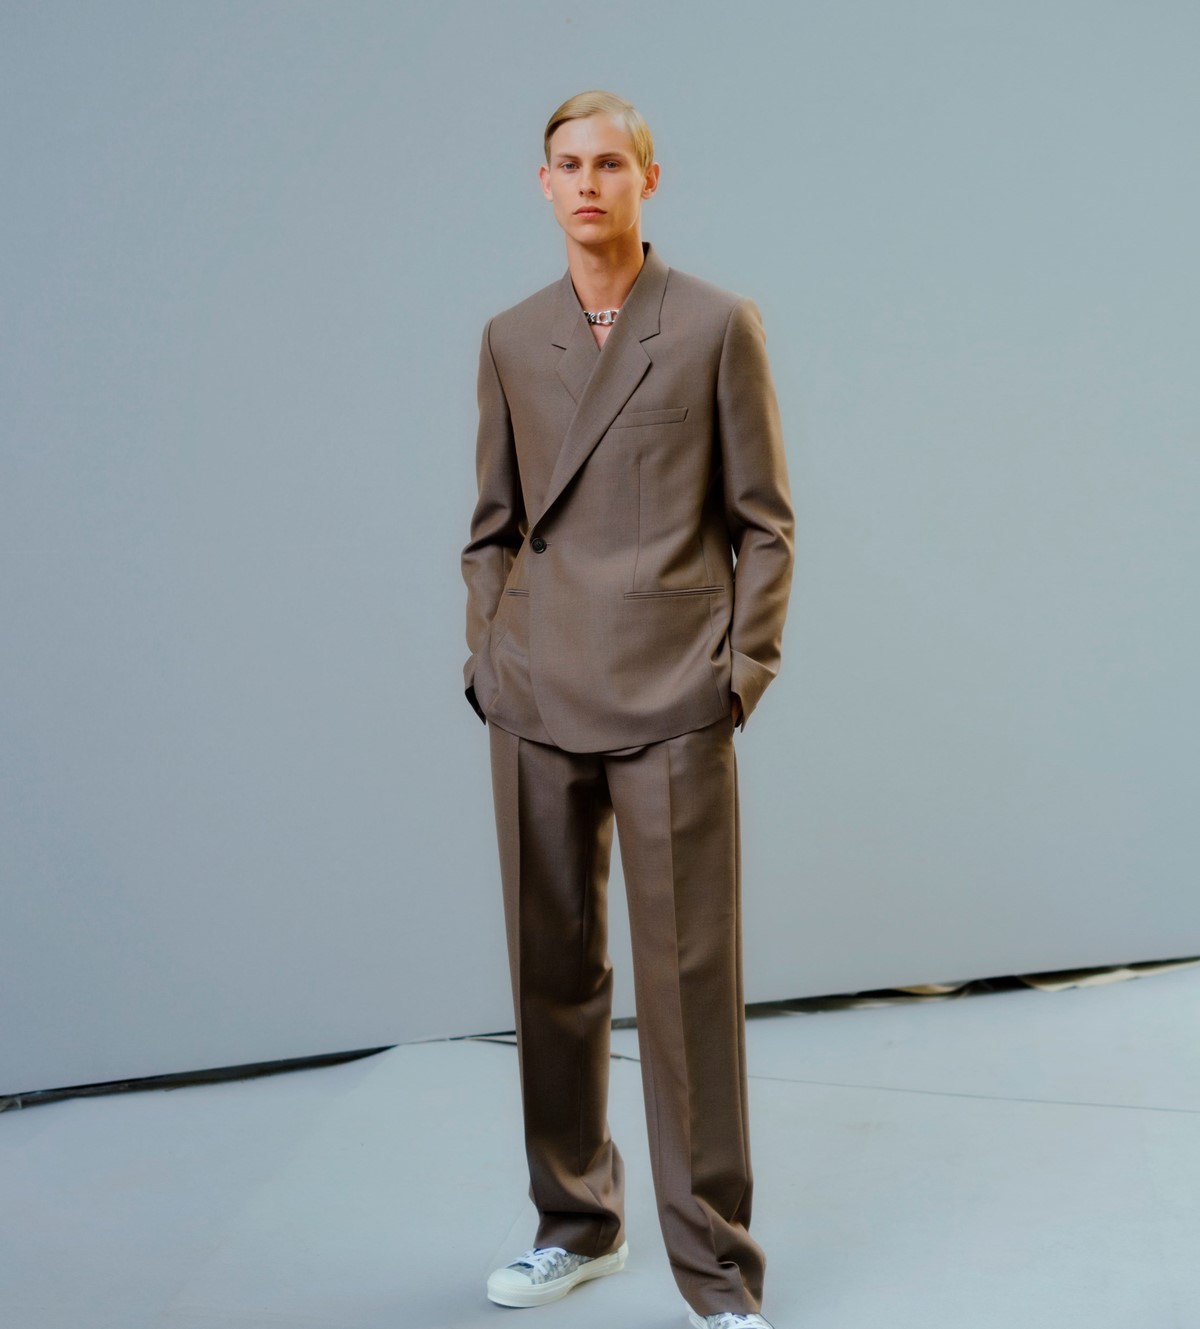 Dior declares mens fashion future to be suited and booted  Lifestyle   The Jakarta Post